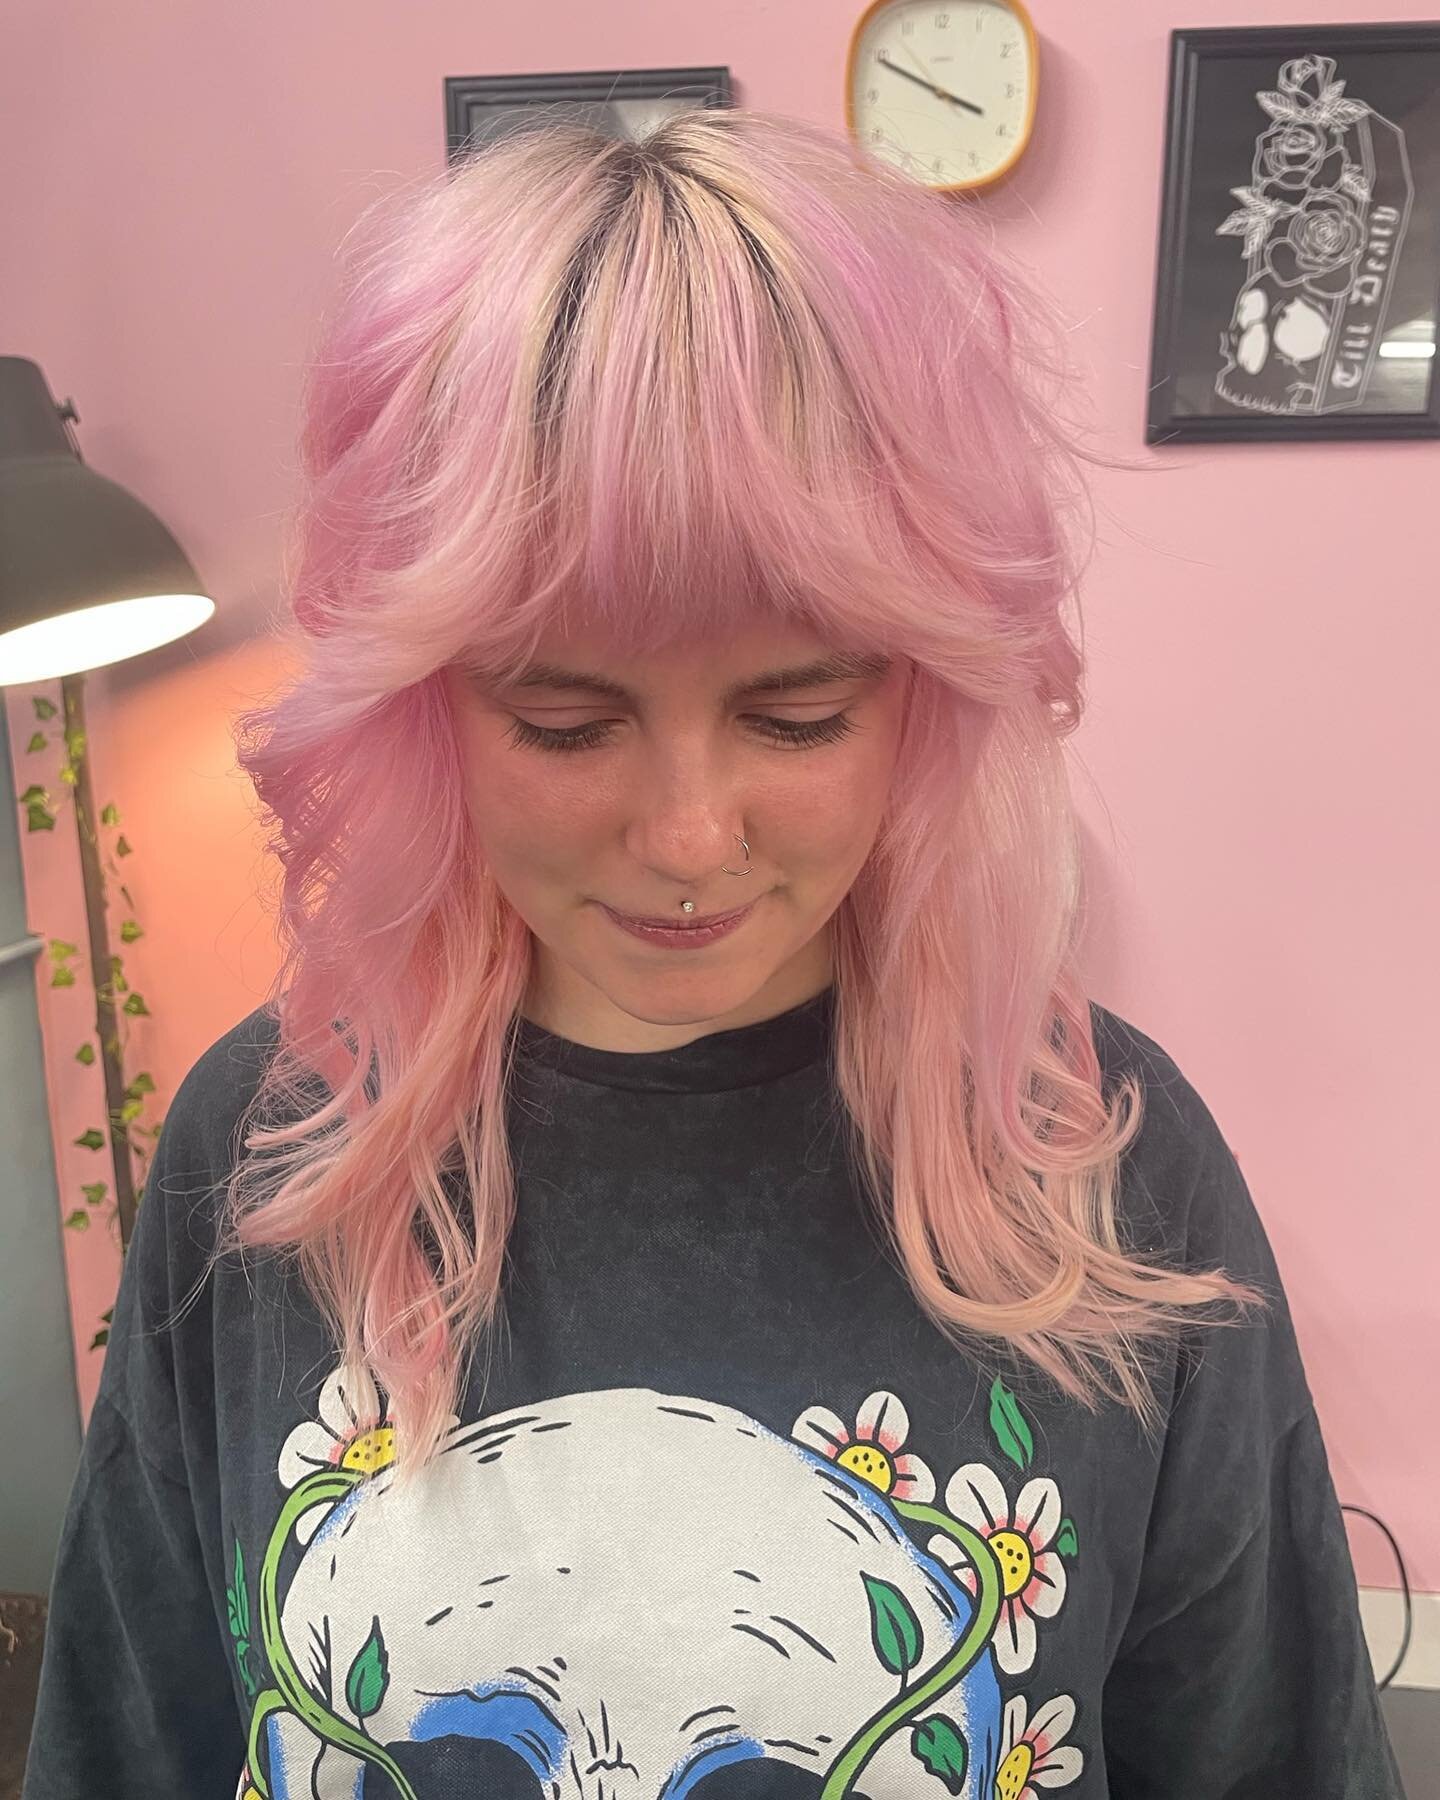 &ldquo;I had a dream last night we, drove out to see Las Vegas&rdquo;

Such a magical cut and colour combo! 🧚🏼&zwj;♀️ (colour not by me)
.
.
.
.
.
#hair #hairdresser #manchester #manchesterhairdresser #haircolourist #hairstylist #wellauk #heartbrea